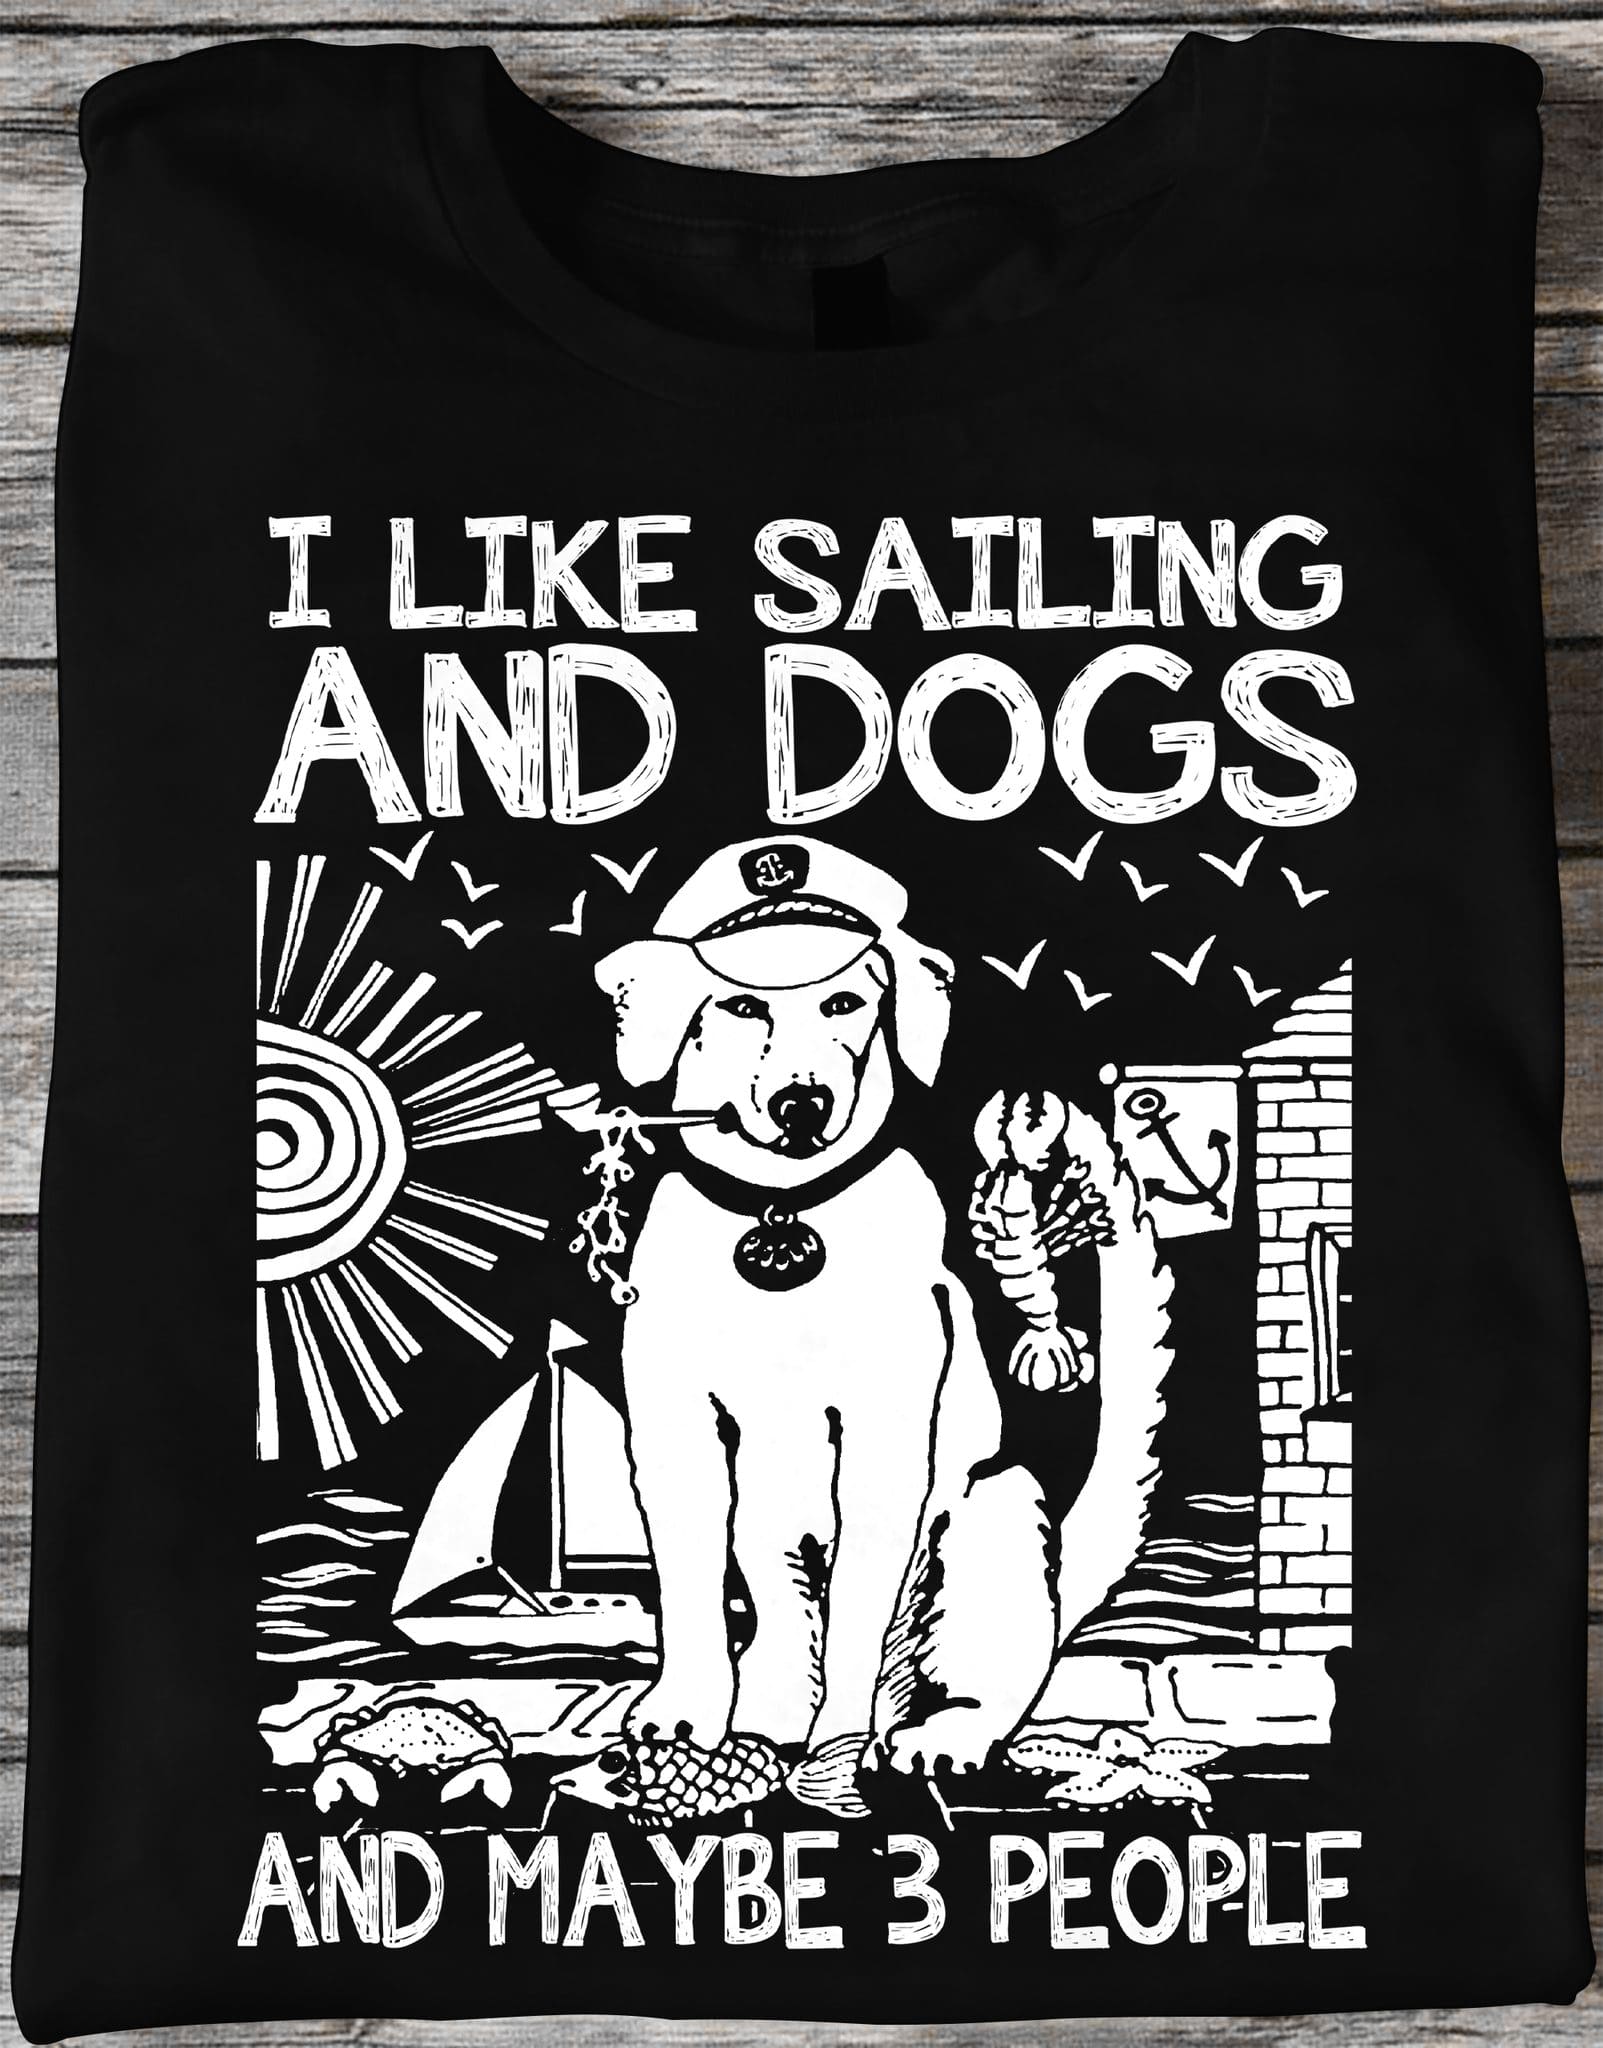 I like sailing and dogs and maybe 3 people - Dog the sailor, dog graphic T-shirt